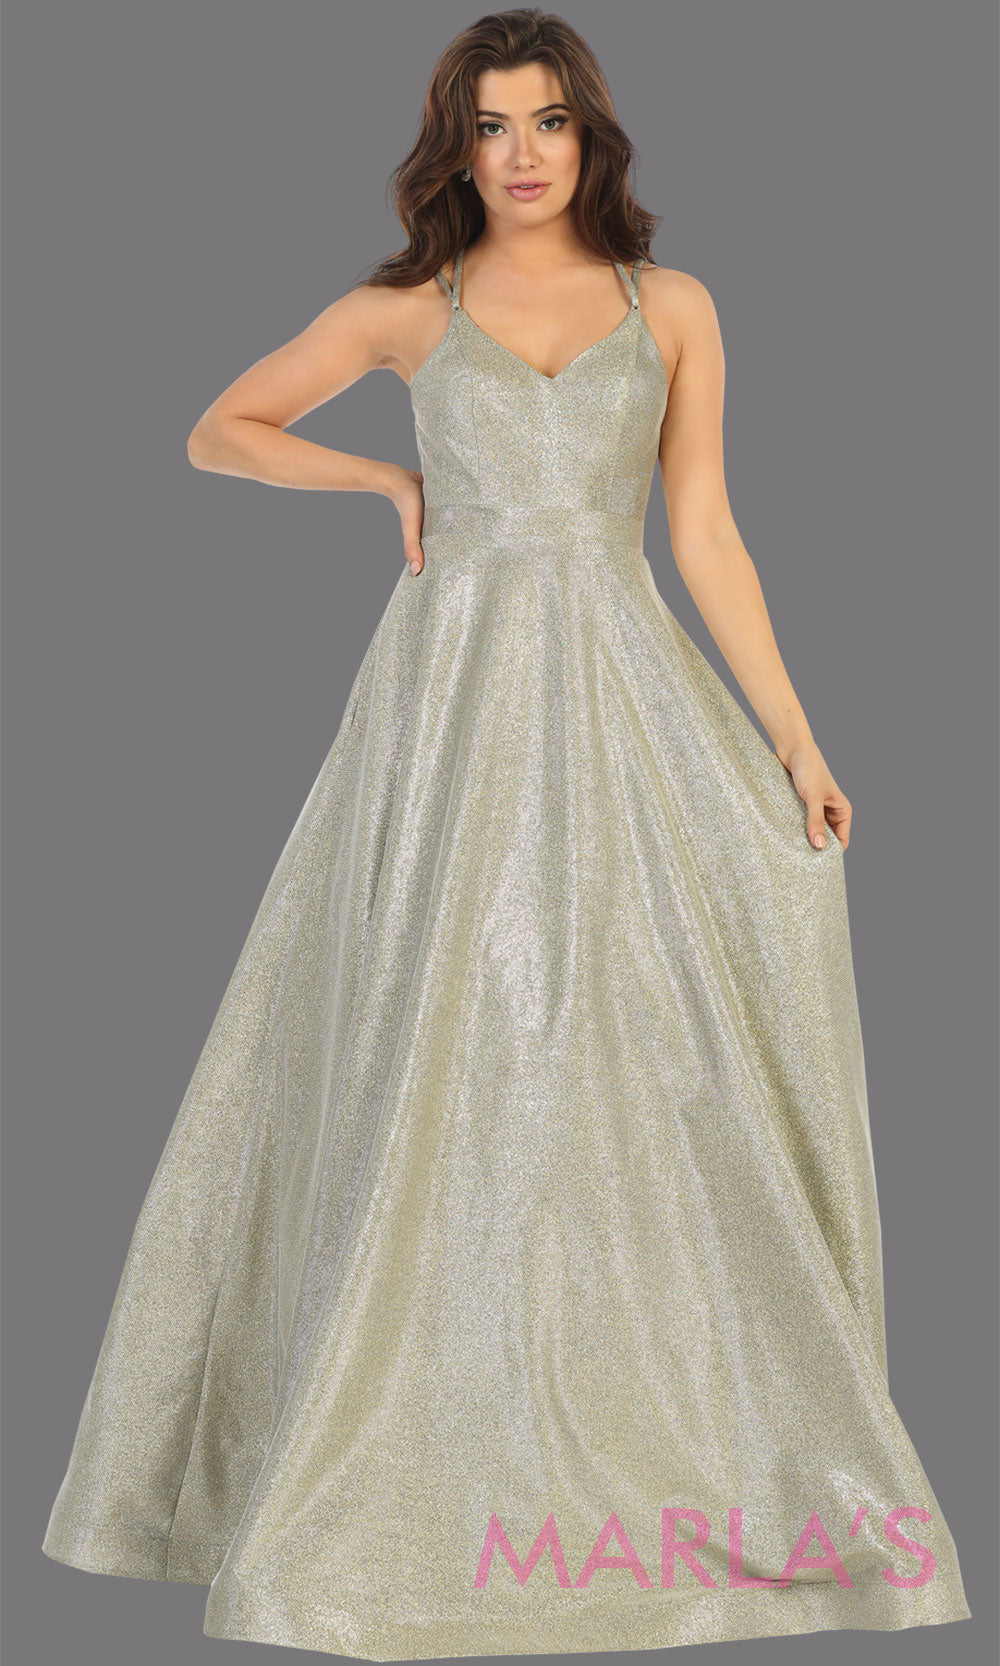 Long silver v neck flowy open back dress from MayQueen RQ7751. This silver metallic gown is perfect for prom, engagement party dress, engagement shoot, e shoot, sweeet 16, sweet 15, plus size formal party dress.